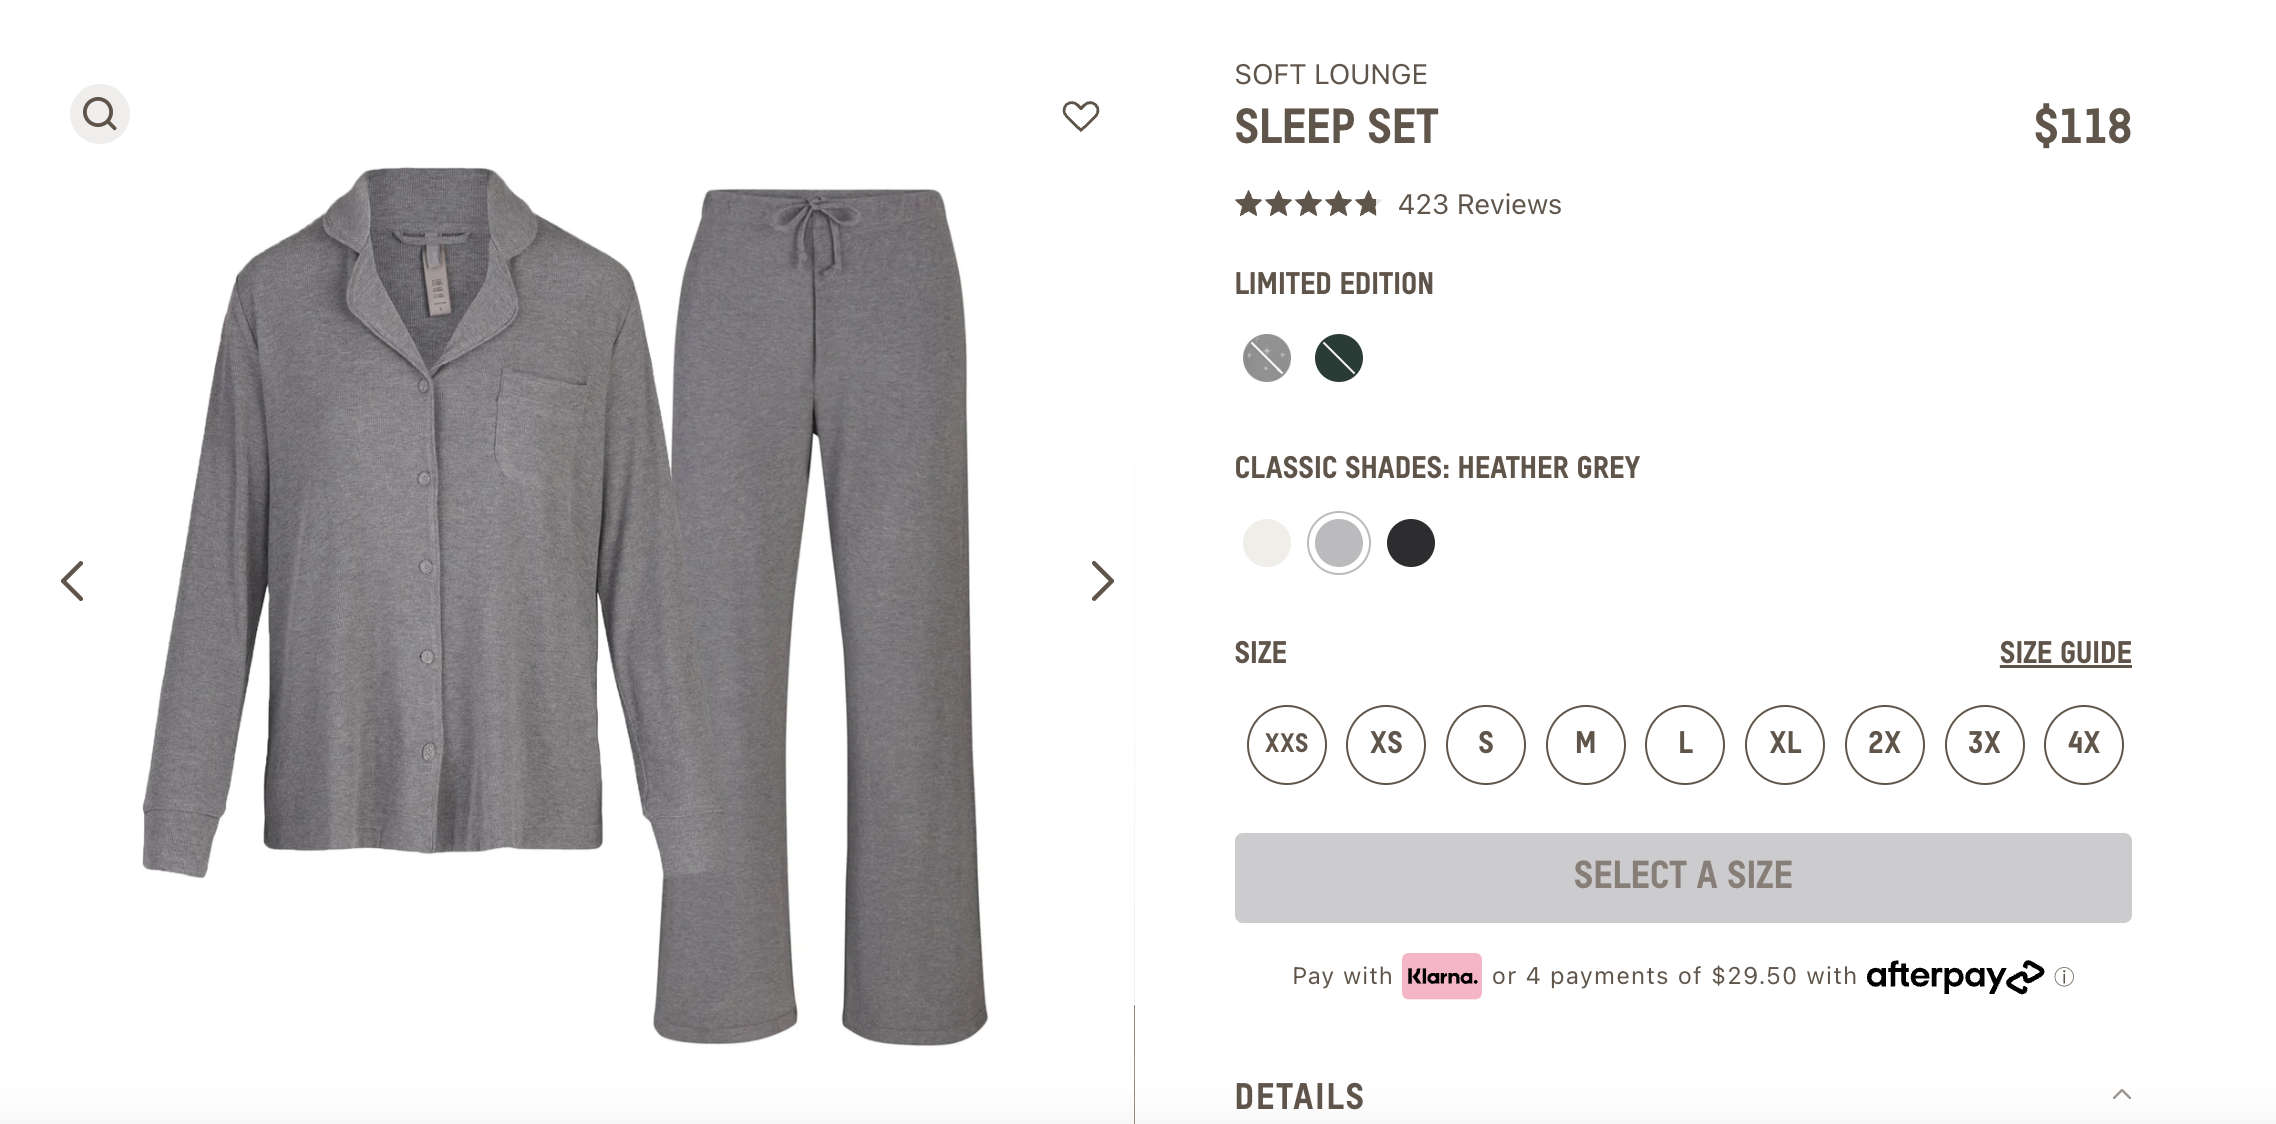 Fashion fan raves about viral Primark pyjamas that's a dupe for